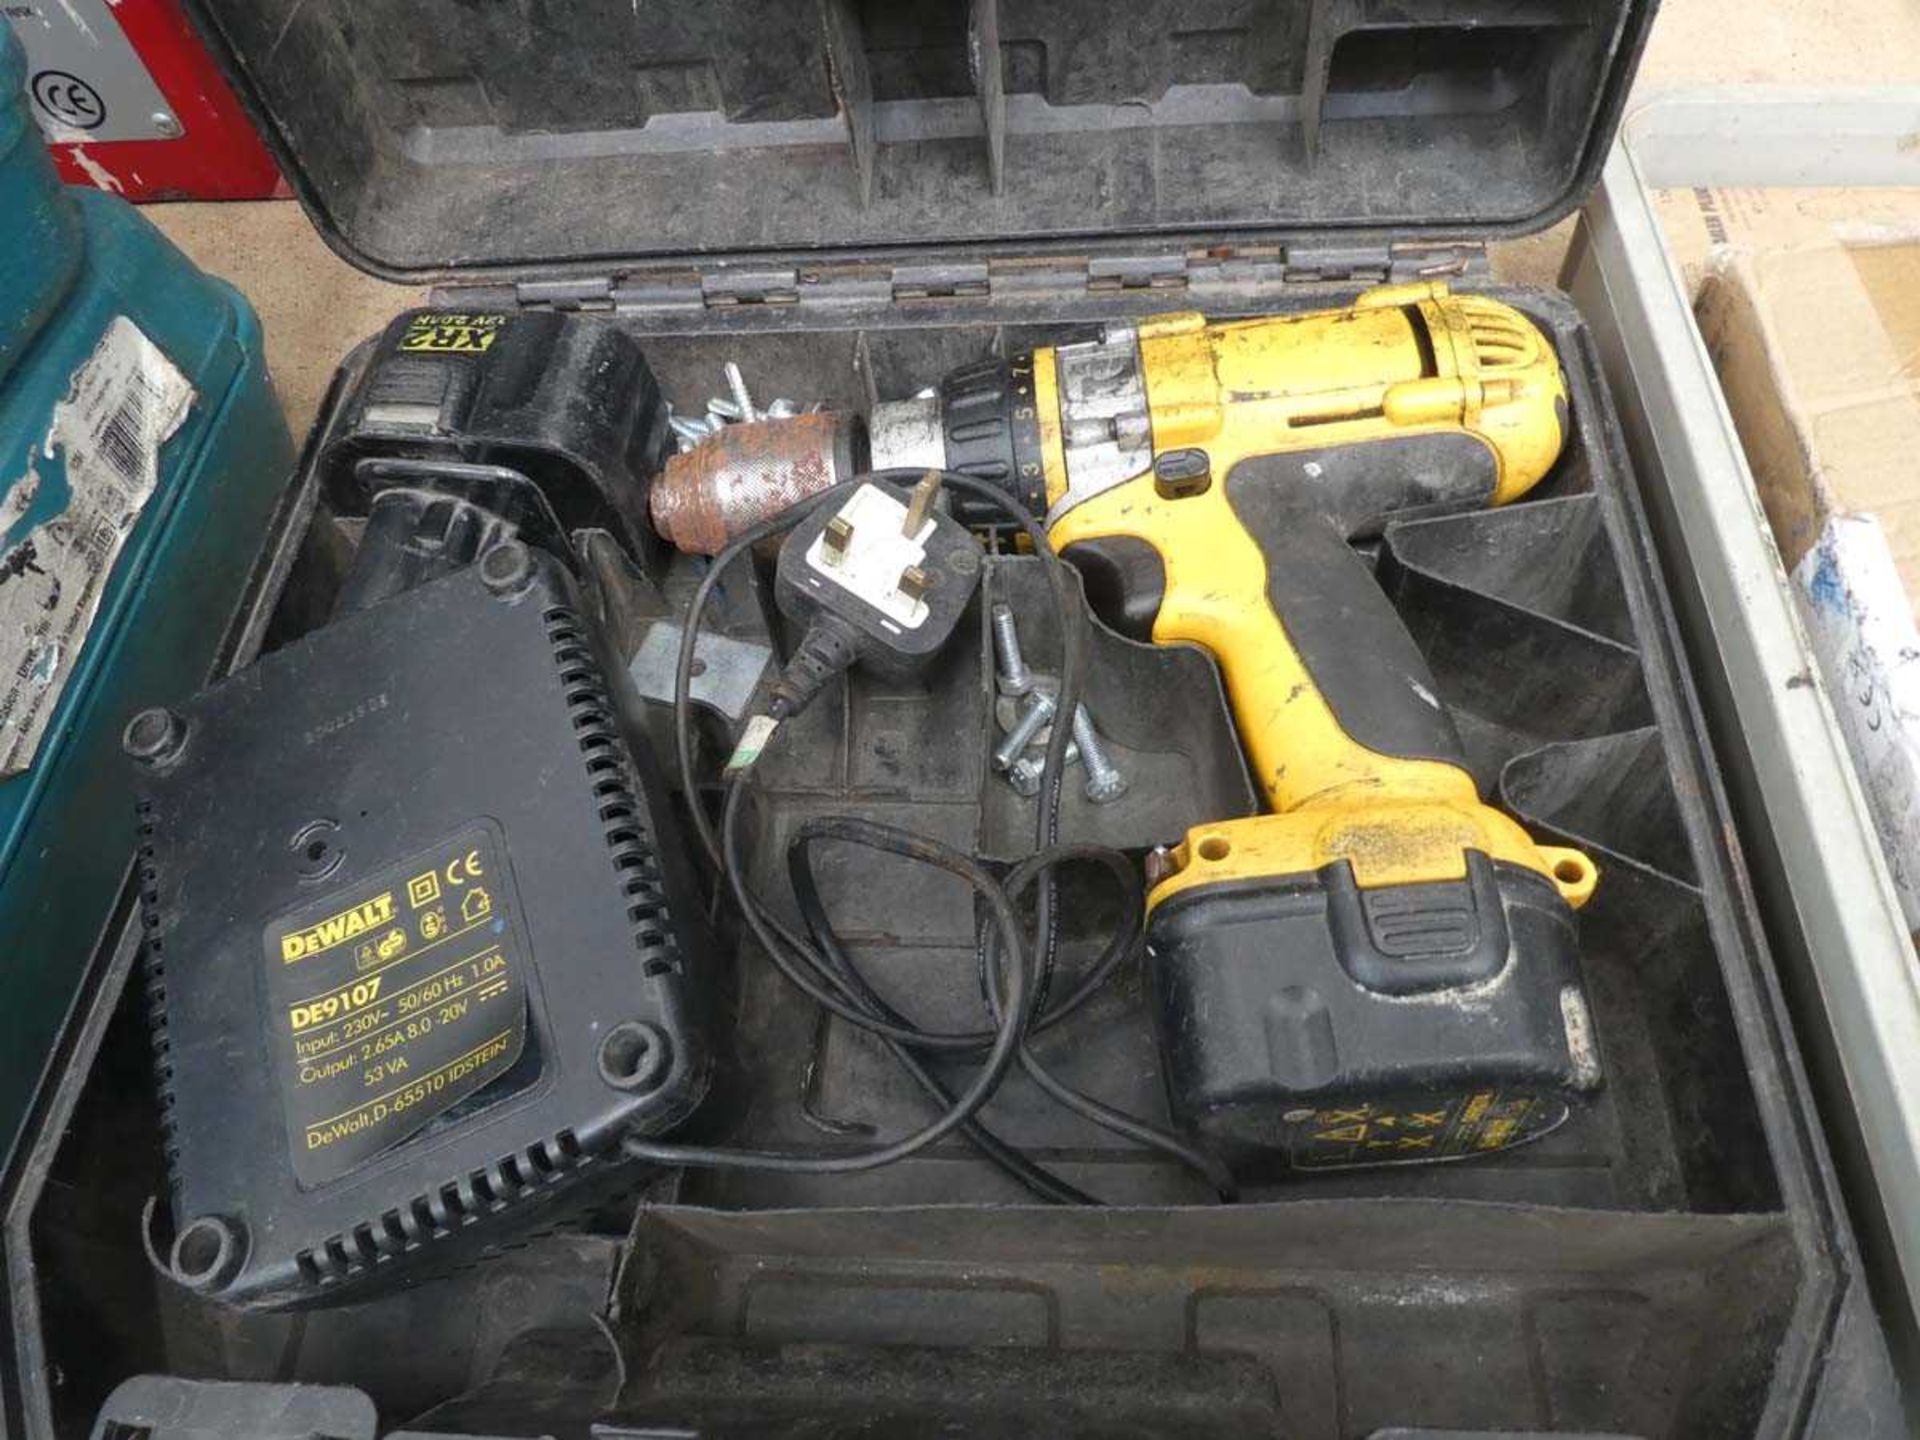 +VAT DeWalt 12v battery drill with 2 batteries and charger